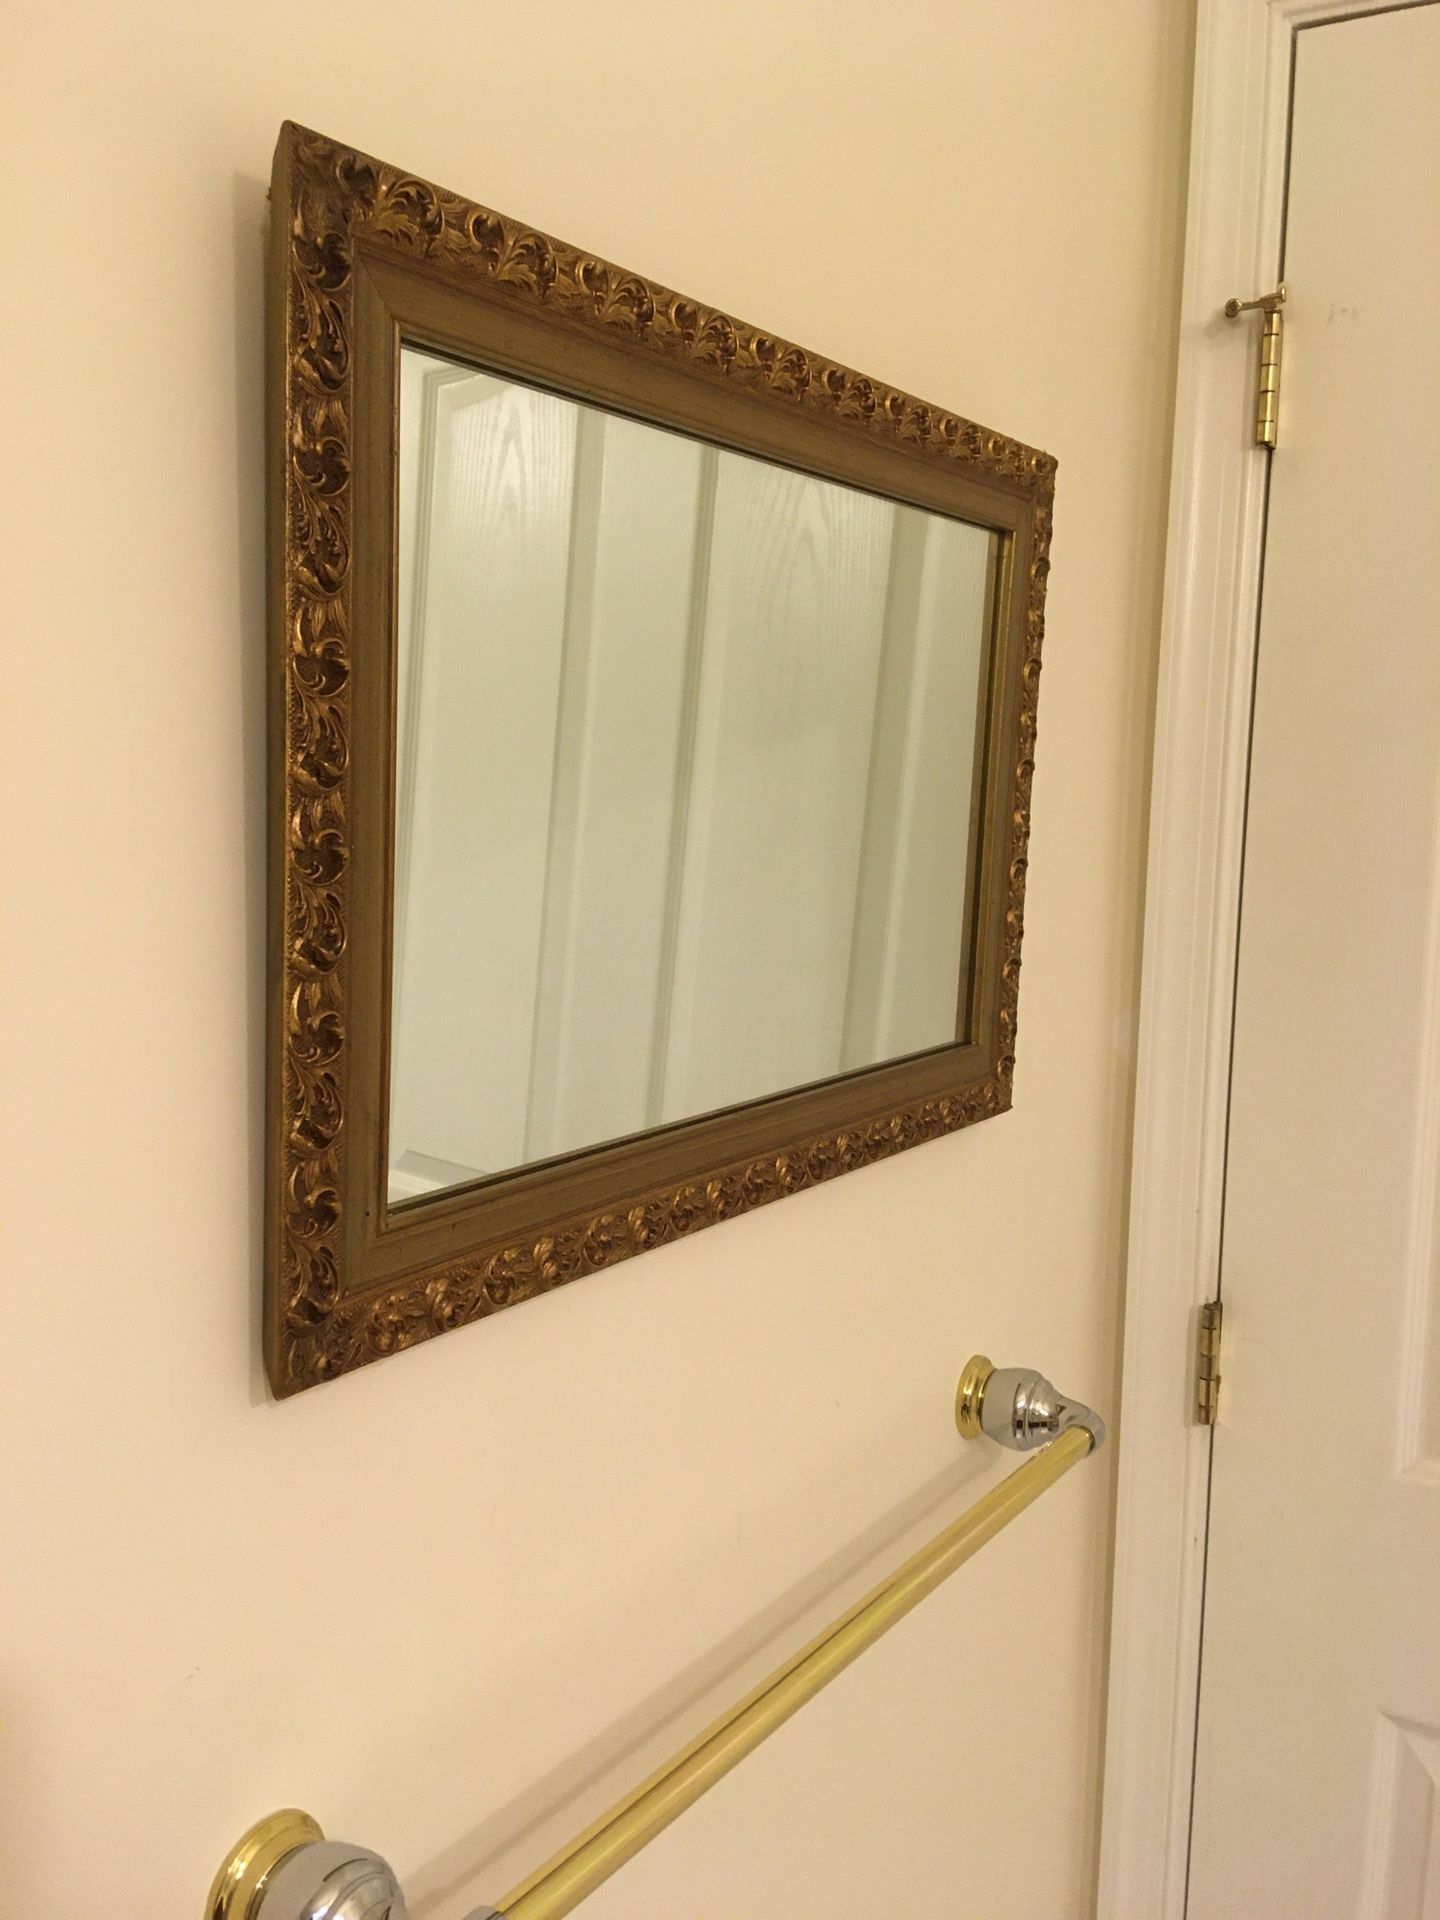 Wall framed mirror- rectangle